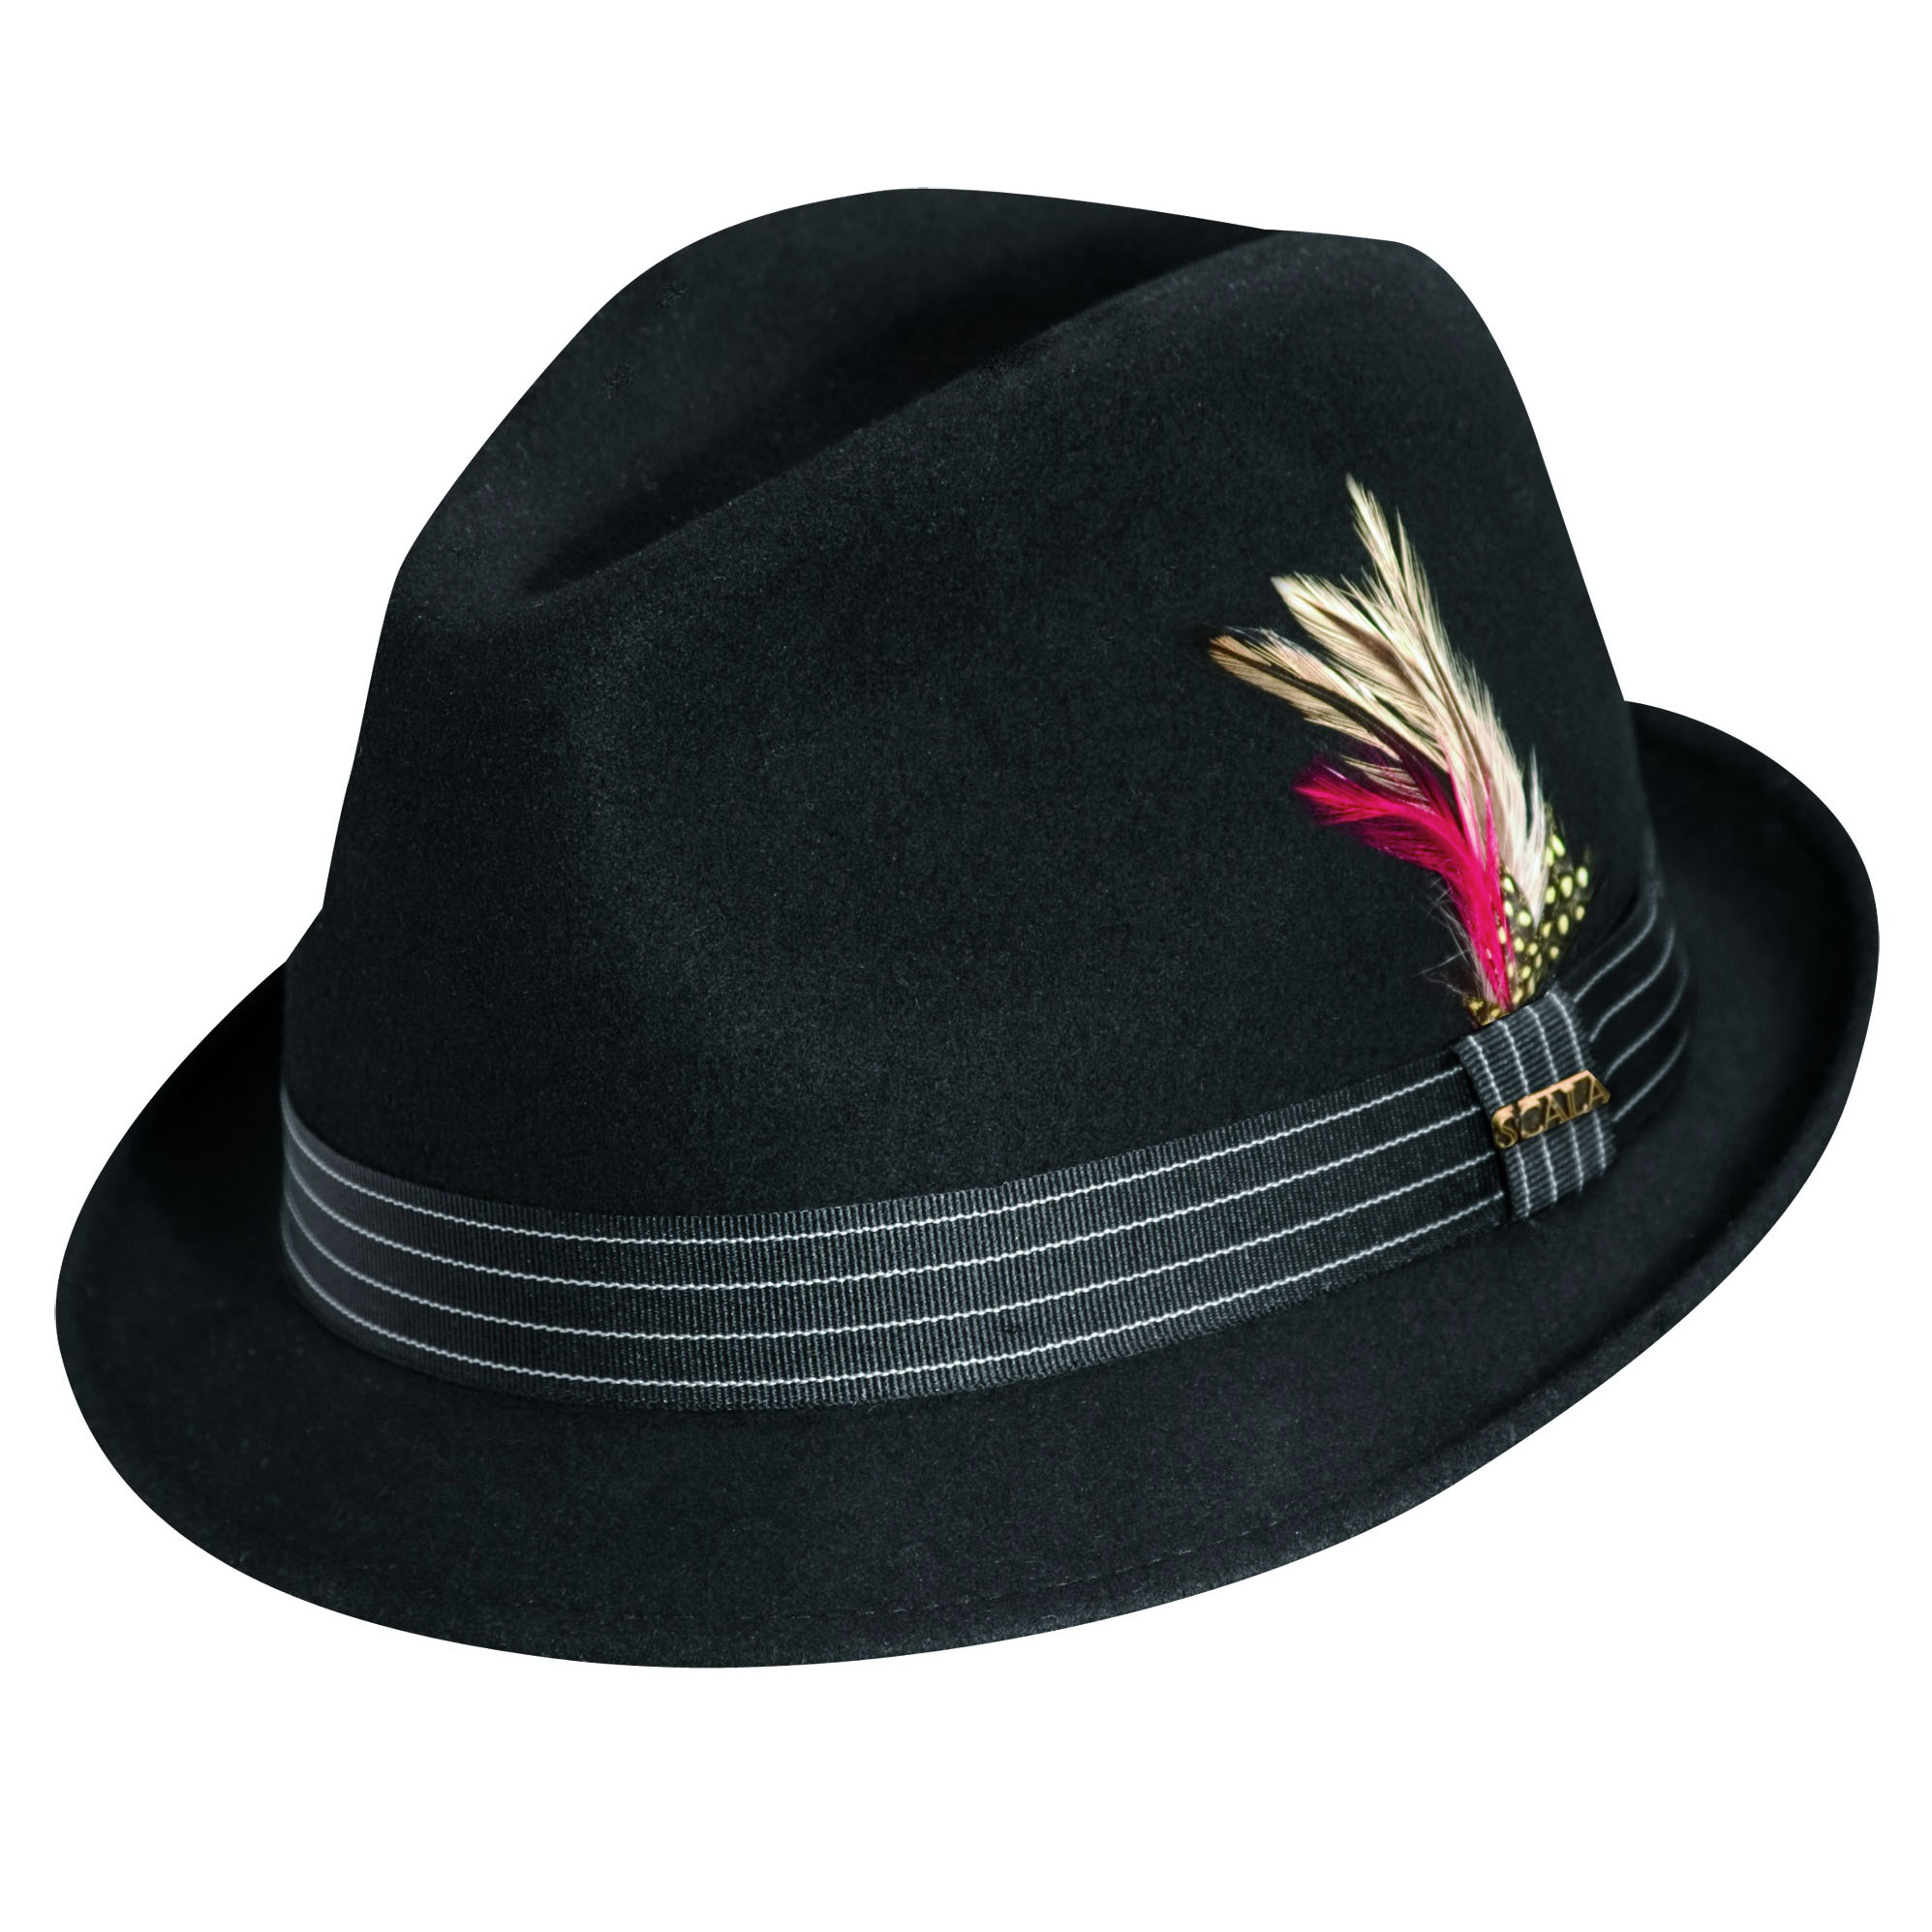 Wool Felt Fedora Hat with Feather Accent | Explorer Hats